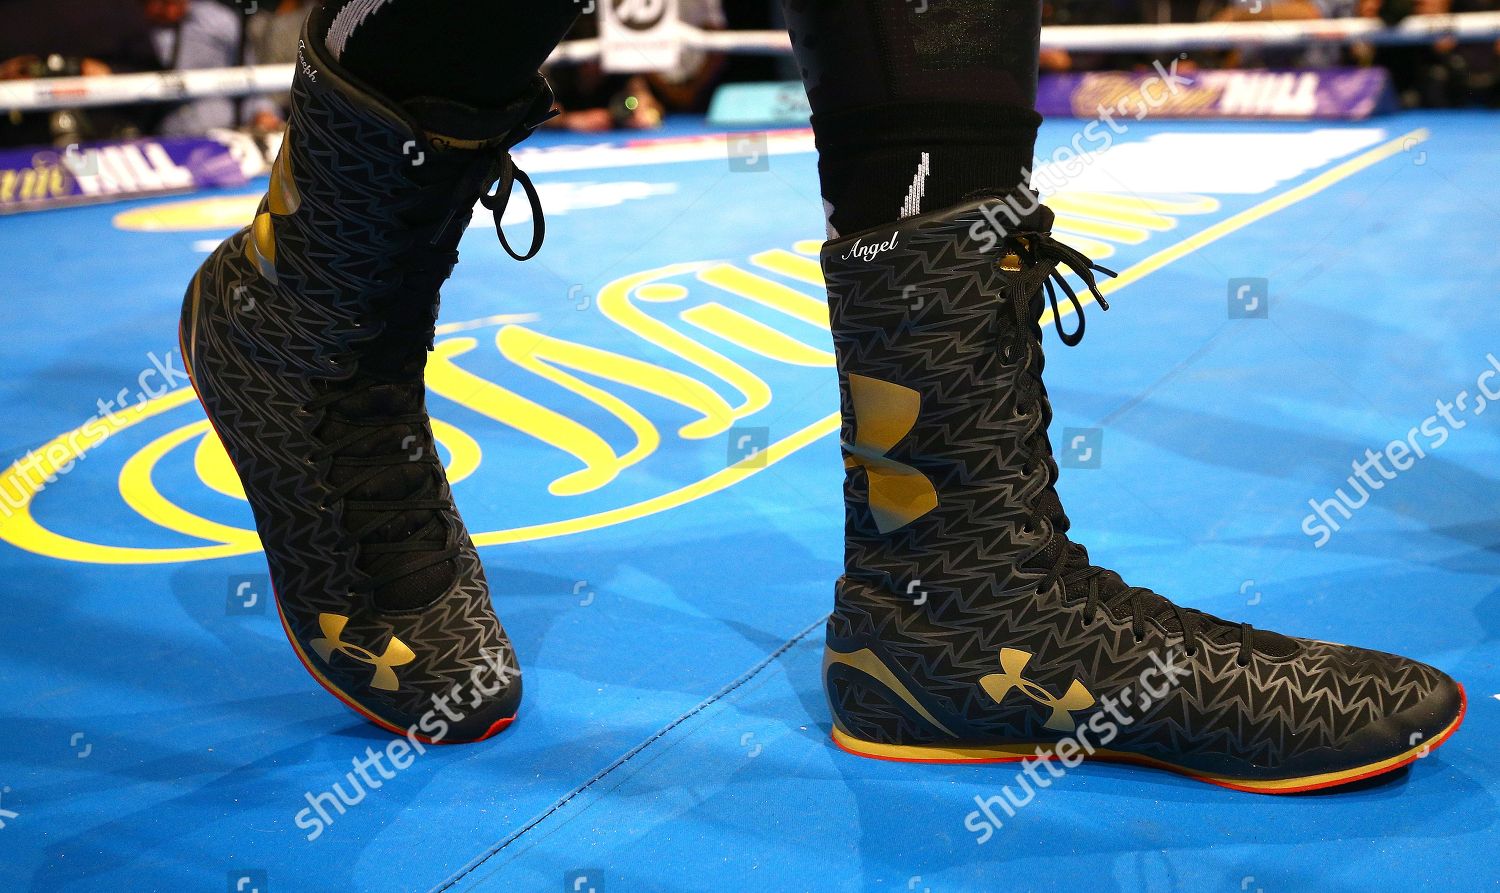 Anterior leninismo Eclipse solar Under Armour Boots Anthony Joshua During Editorial Stock Photo - Stock  Image | Shutterstock